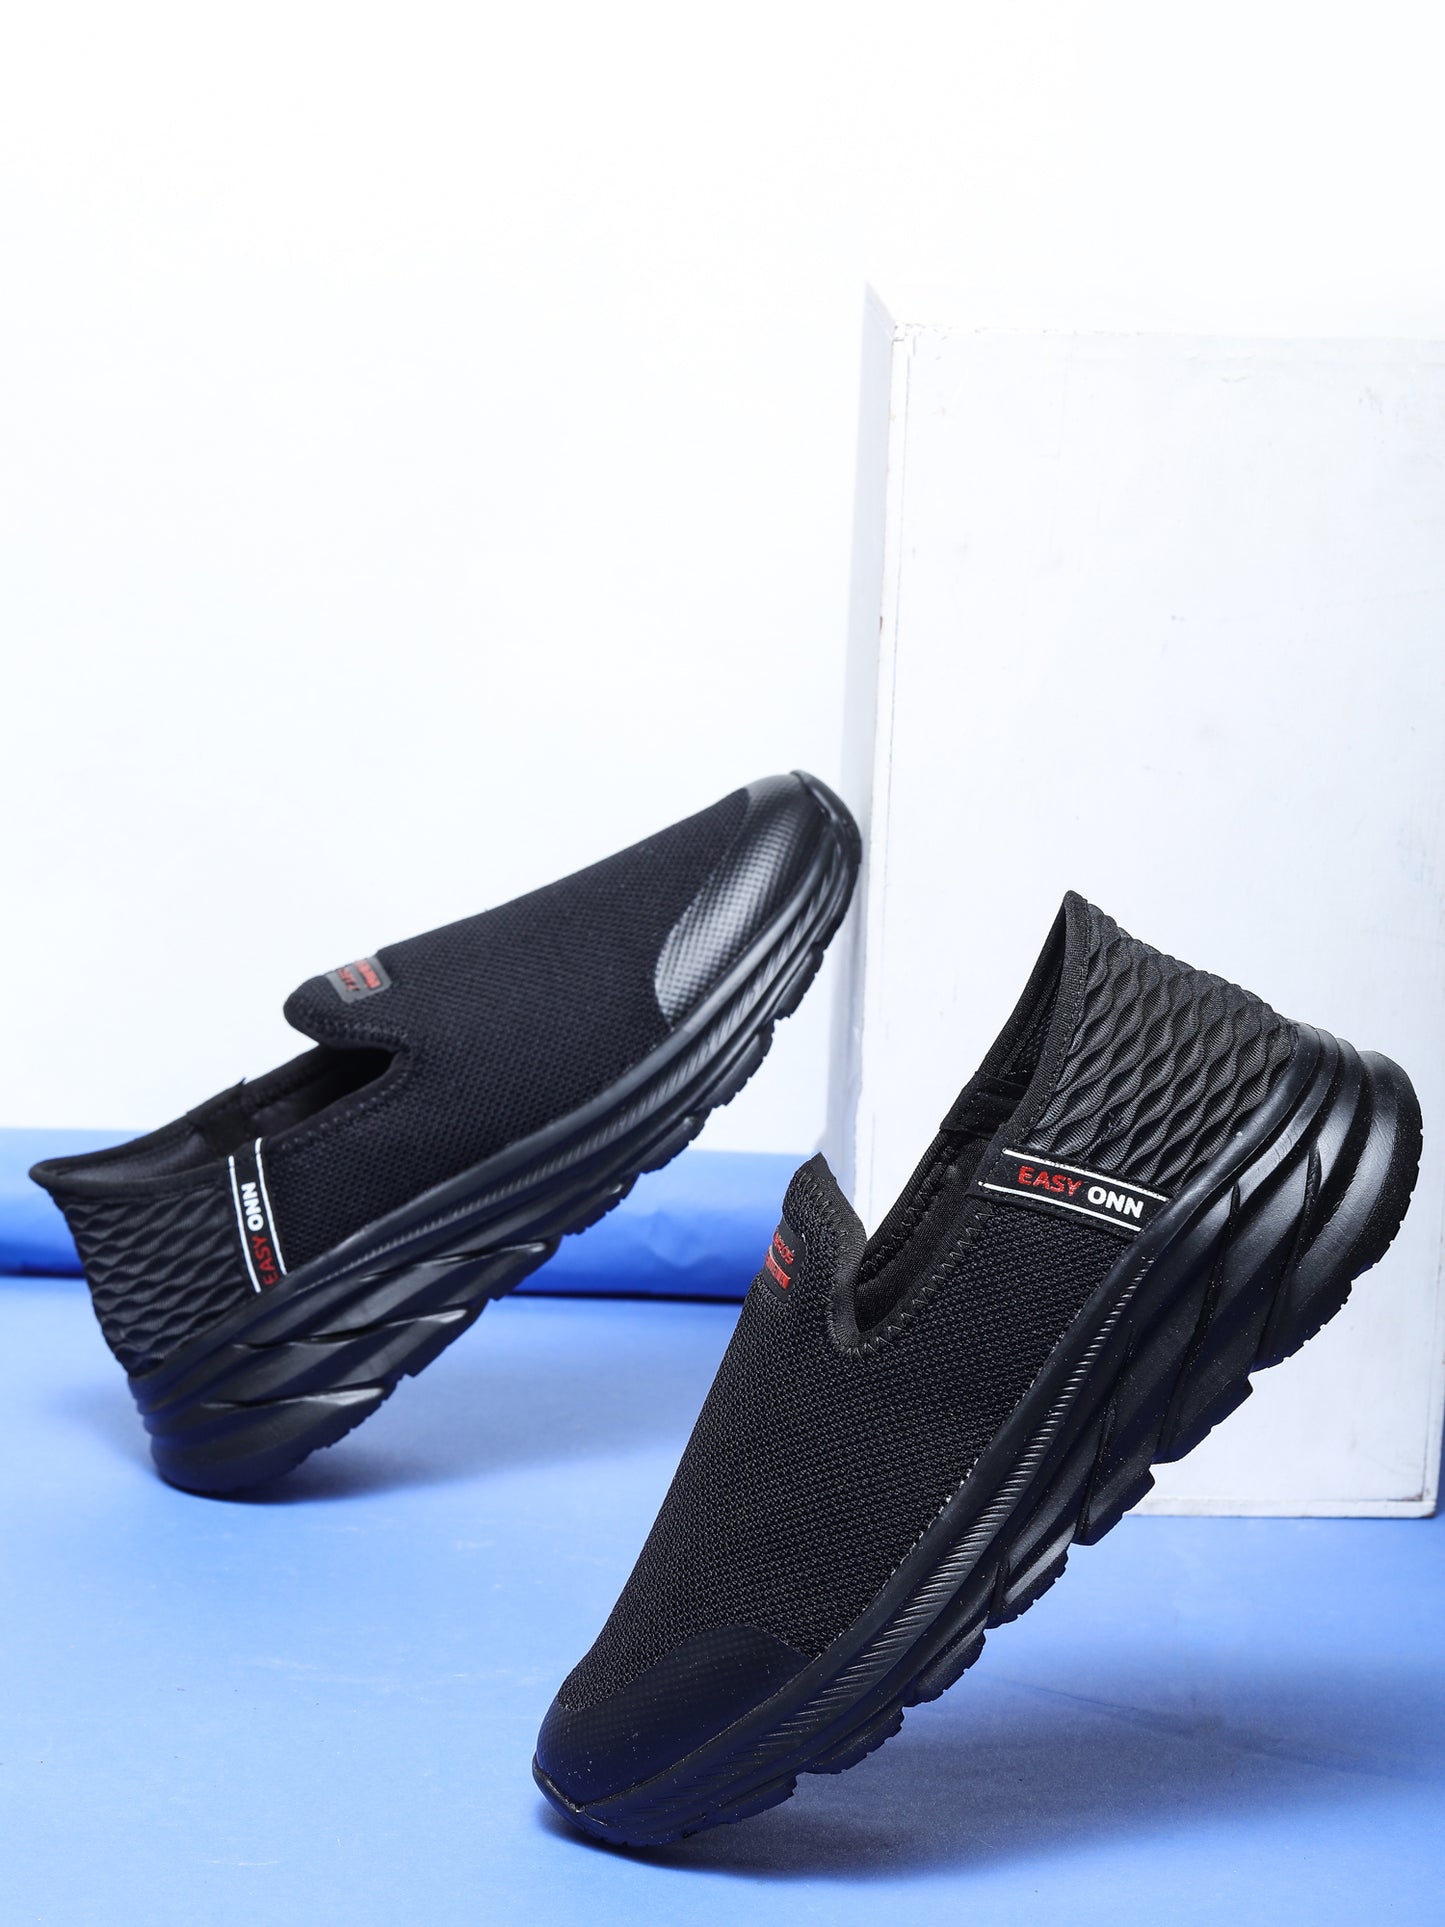 ABROS Easy-On Sports Shoes For Men